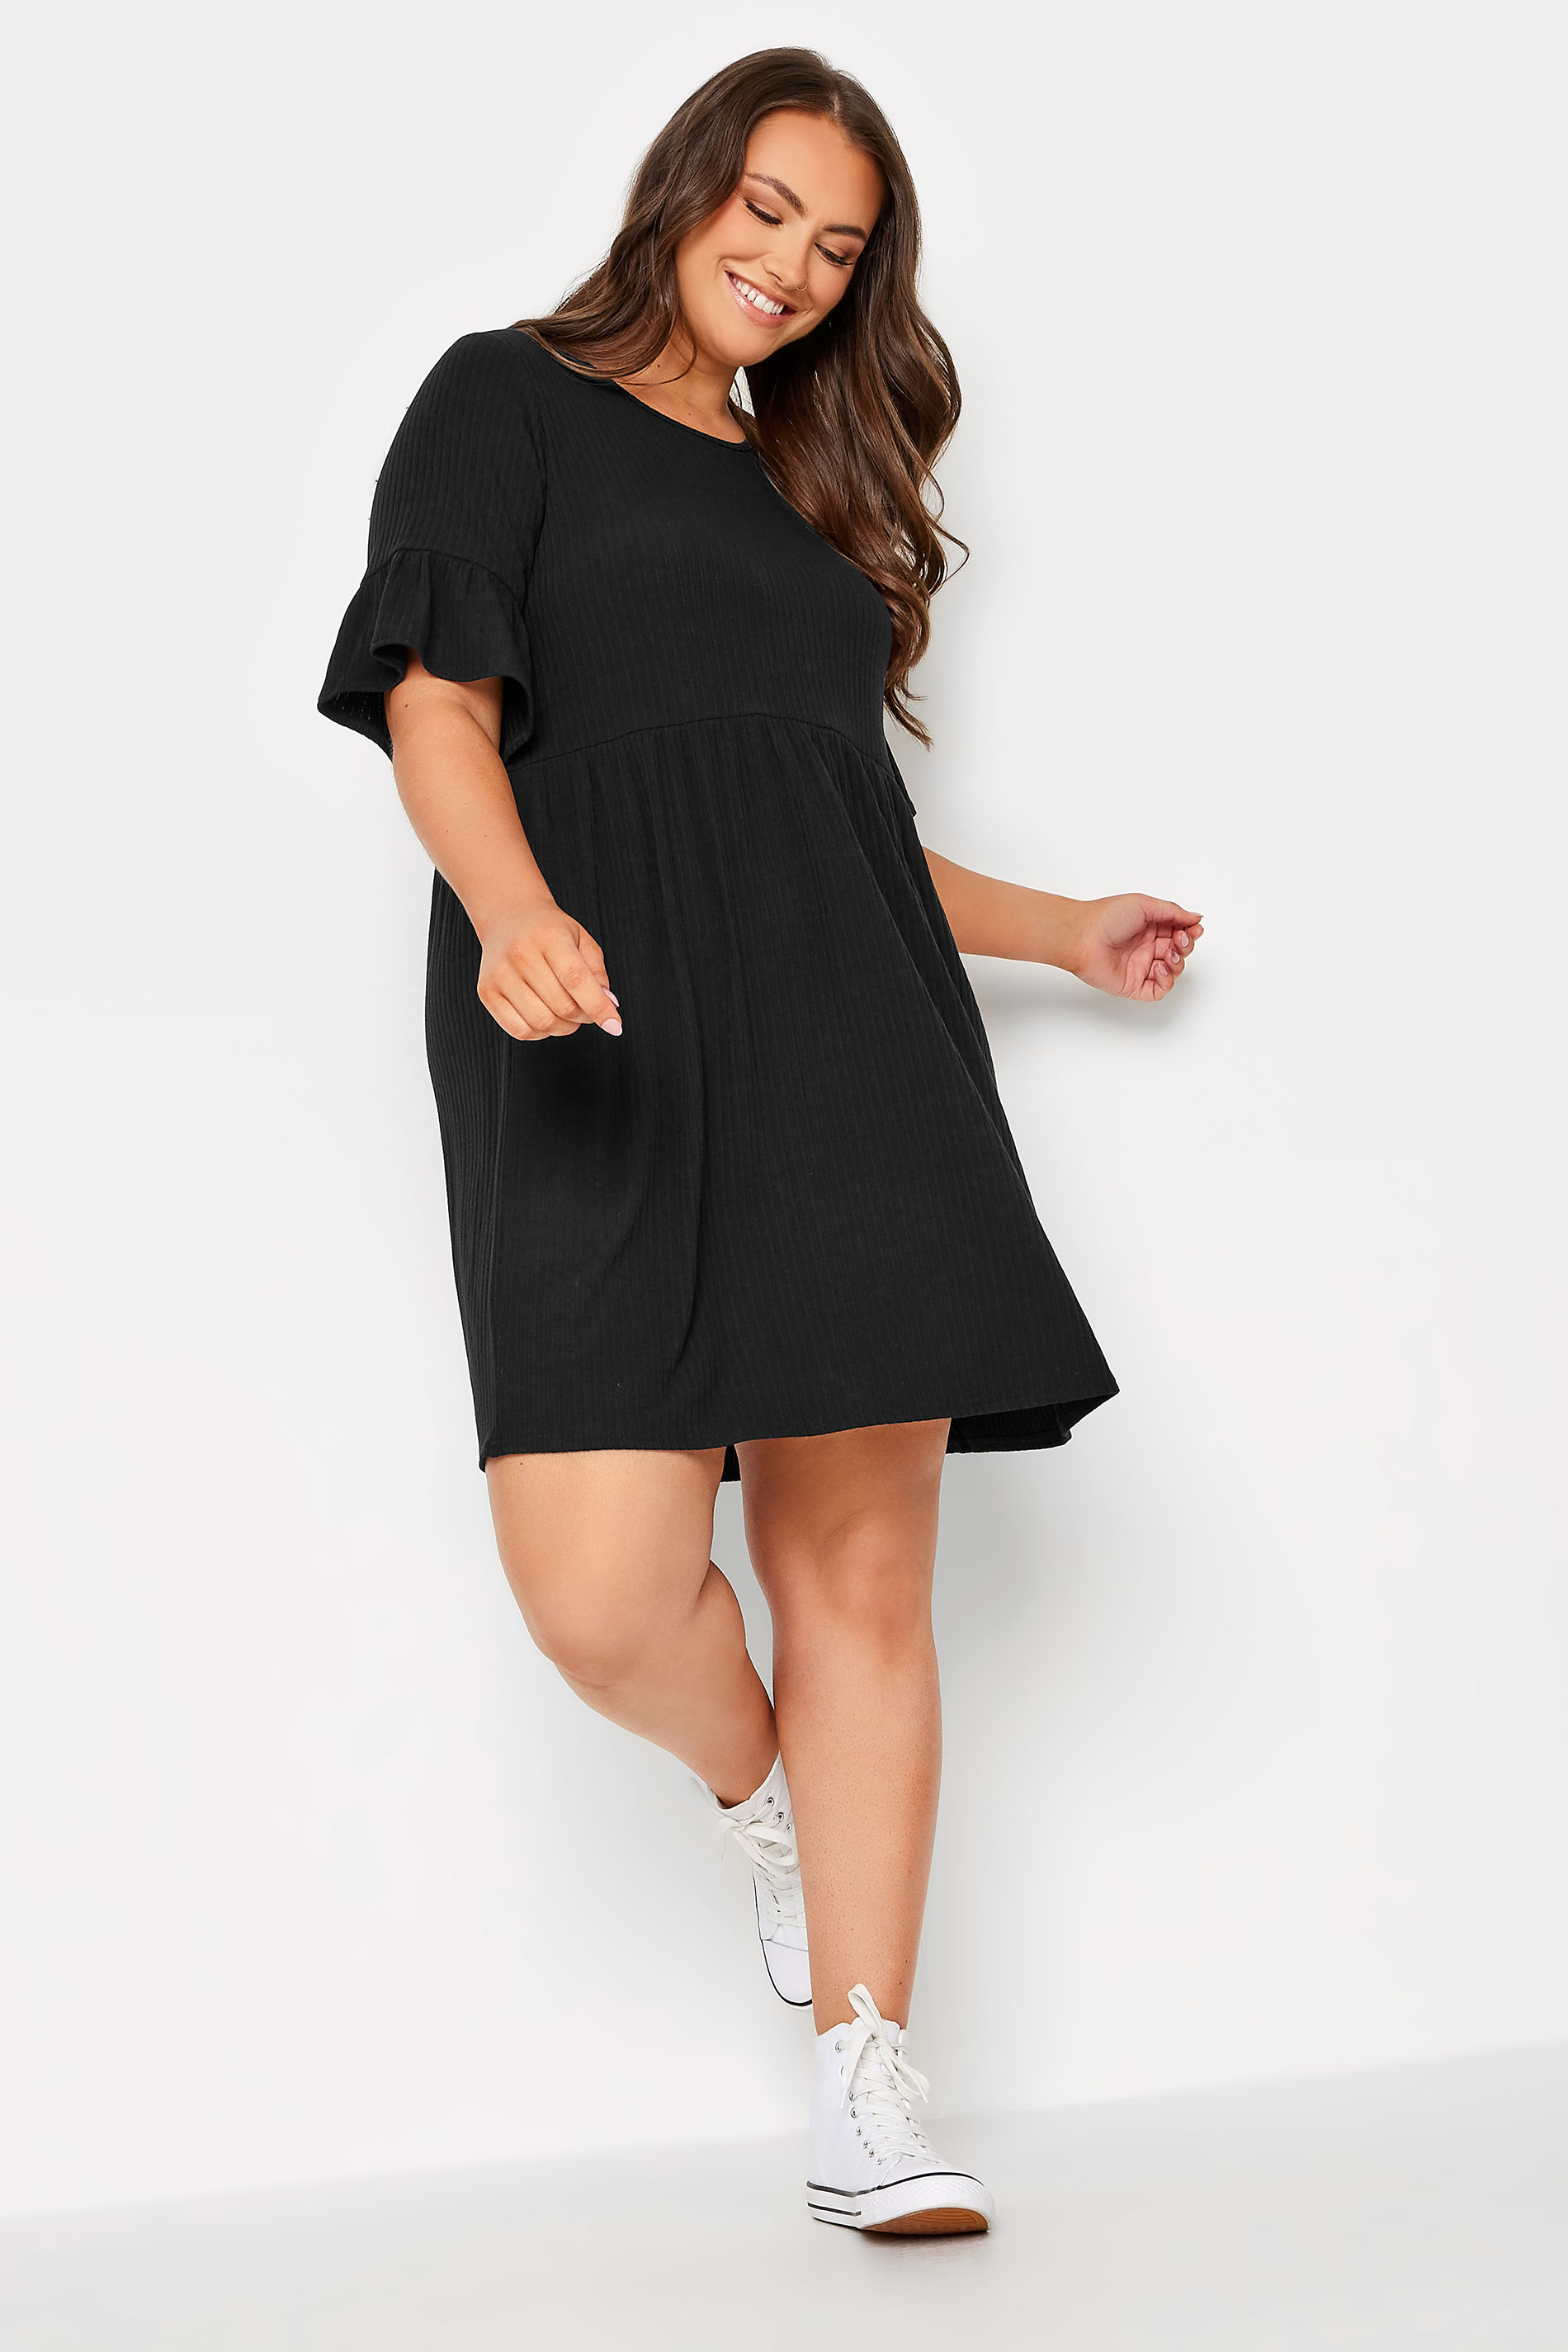 YOURS Curve Plus Size Black Frill Sleeve Tunic Dress